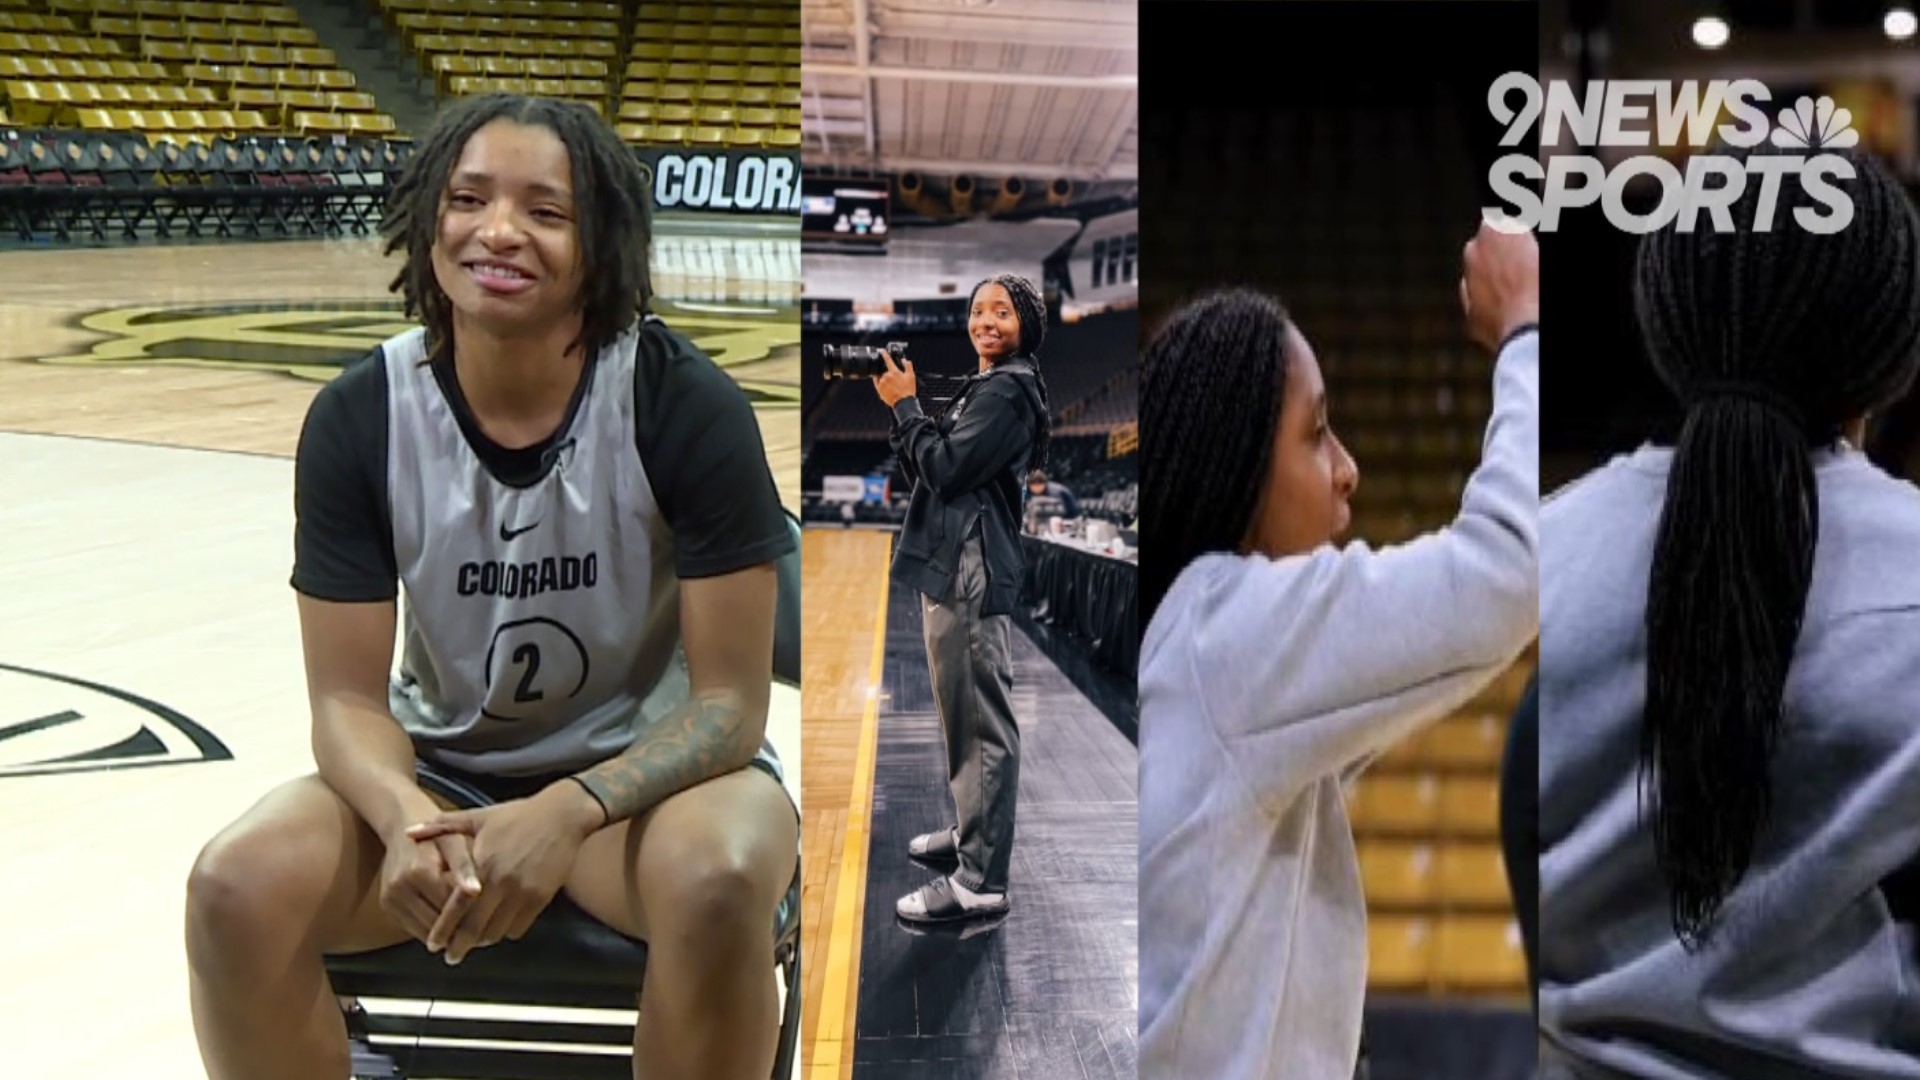 Colorado junior guard Tameiya Sadler spent last postseason as a support system for the Buffs. Now, she's back on the court in the NCAA Tournament.